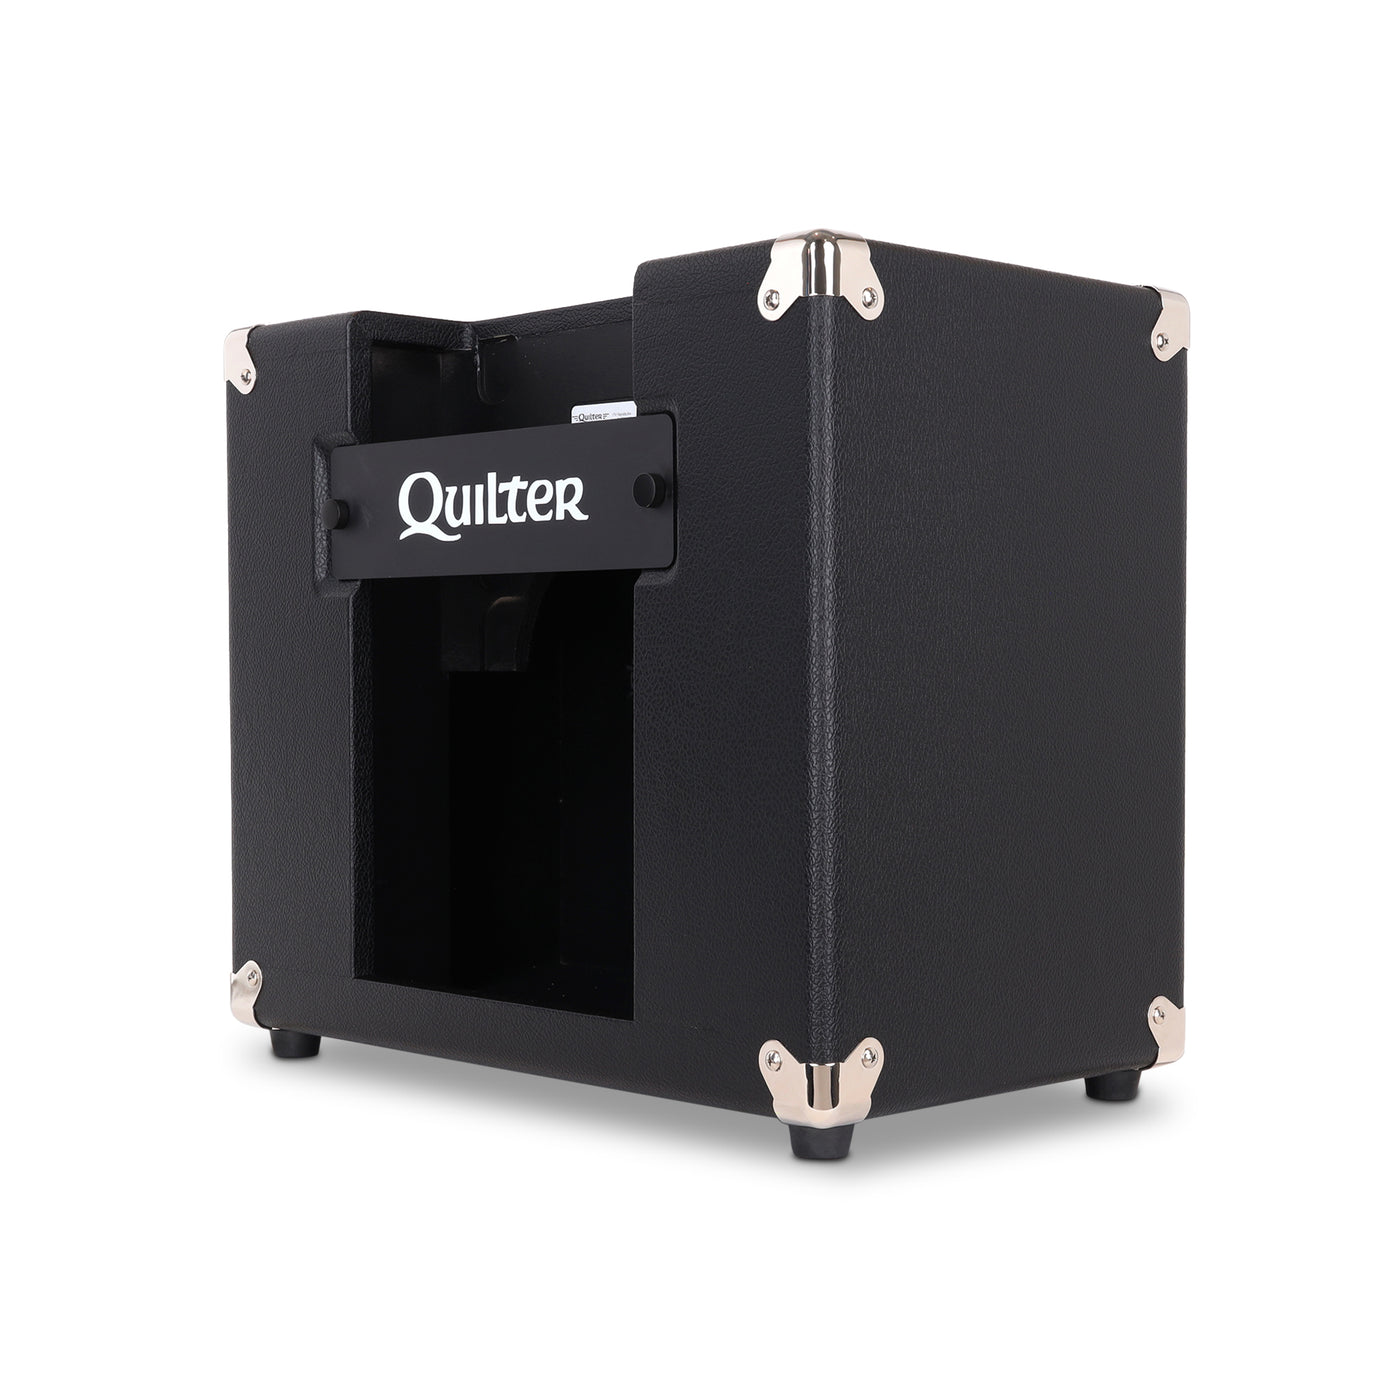 Quilter Labs BlockDock 12 HD amplifier cabinet - facing away diagonally to the right